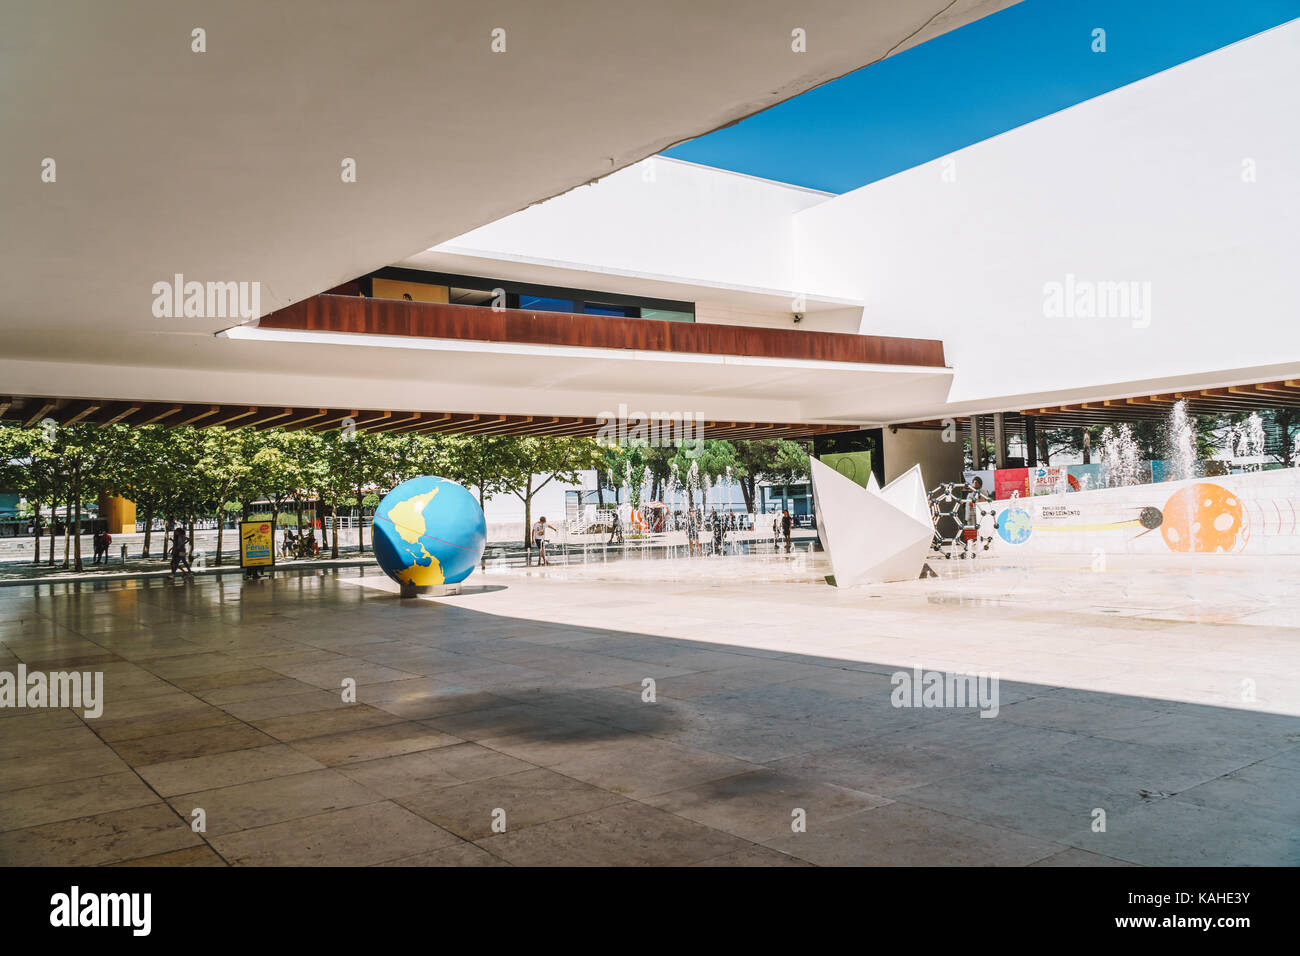 LISBON, PORTUGAL - AUGUST 10, 2017: The Pavilion of Knowledge (Pavilhao do Conhecimentois or Ciencia Viva) an interactive science and technology museu Stock Photo